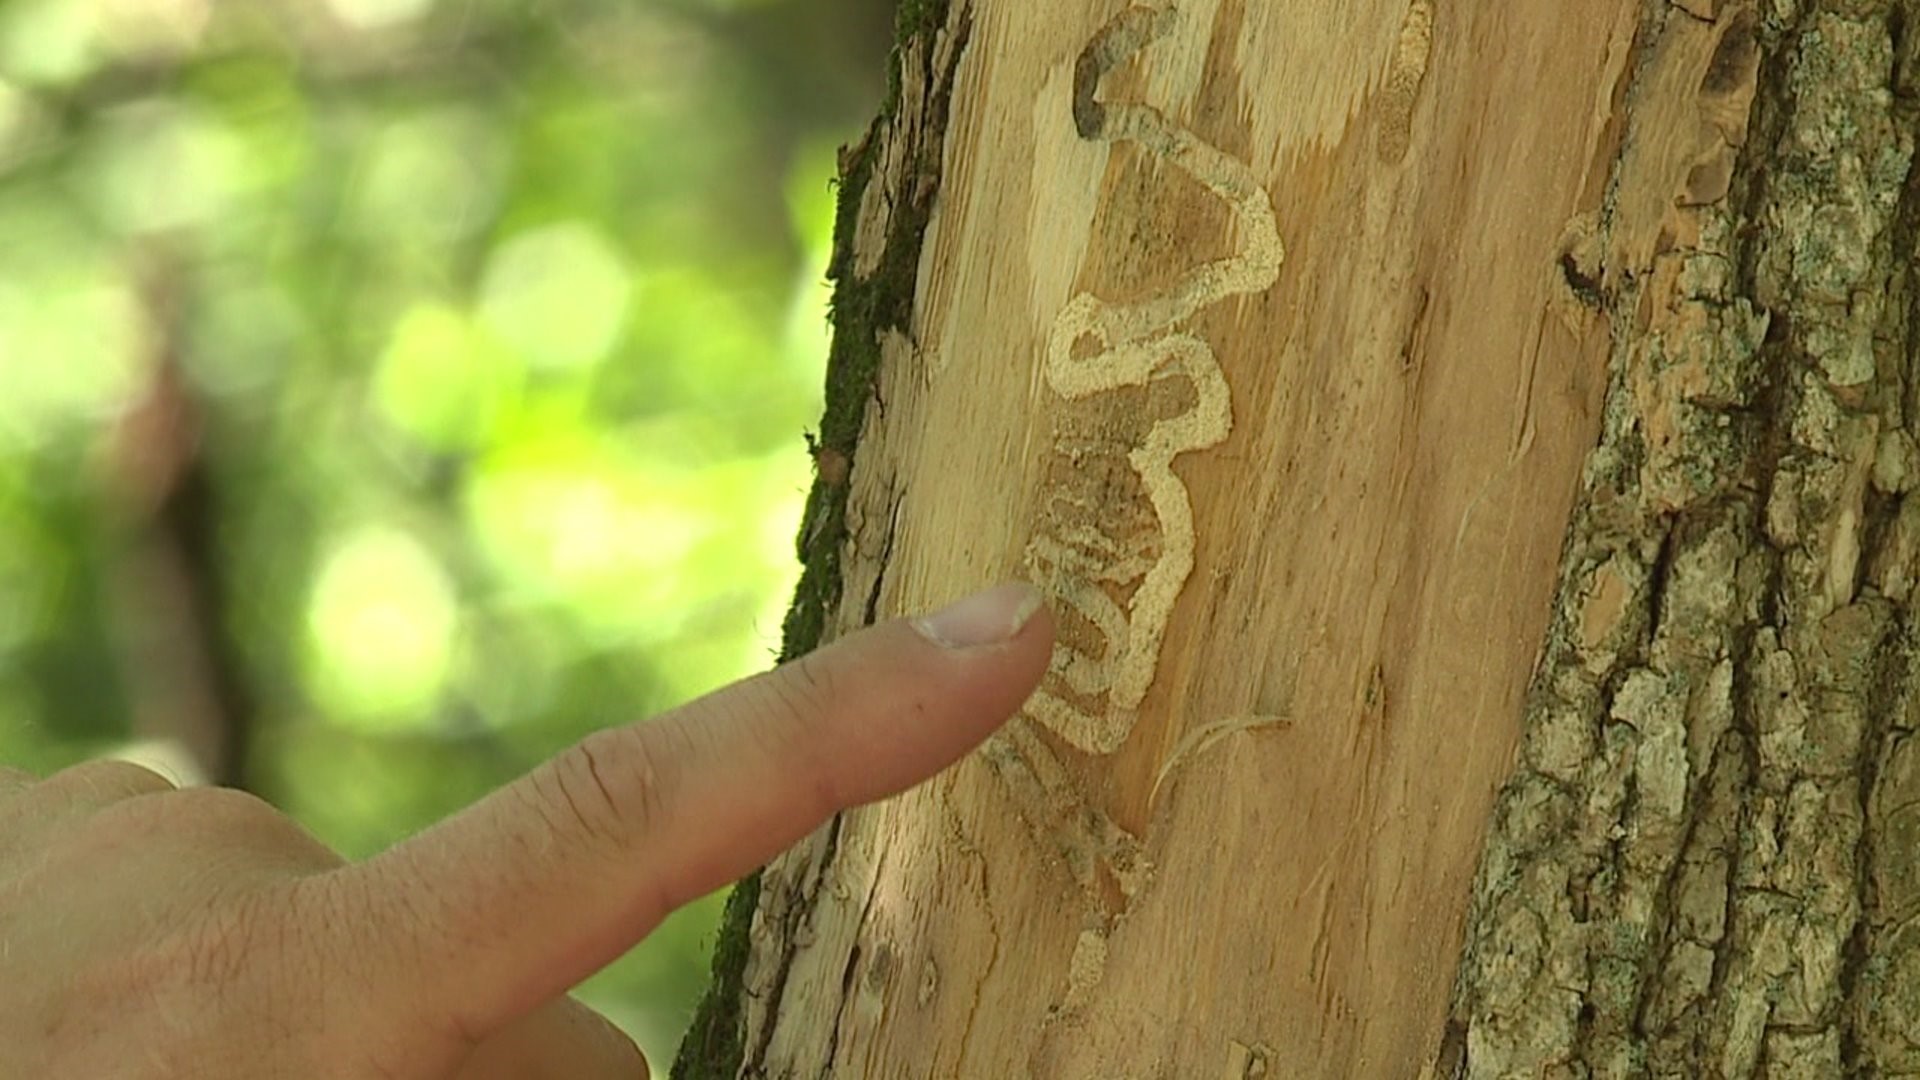 Wasp could help diminish emerald ash borer numbers